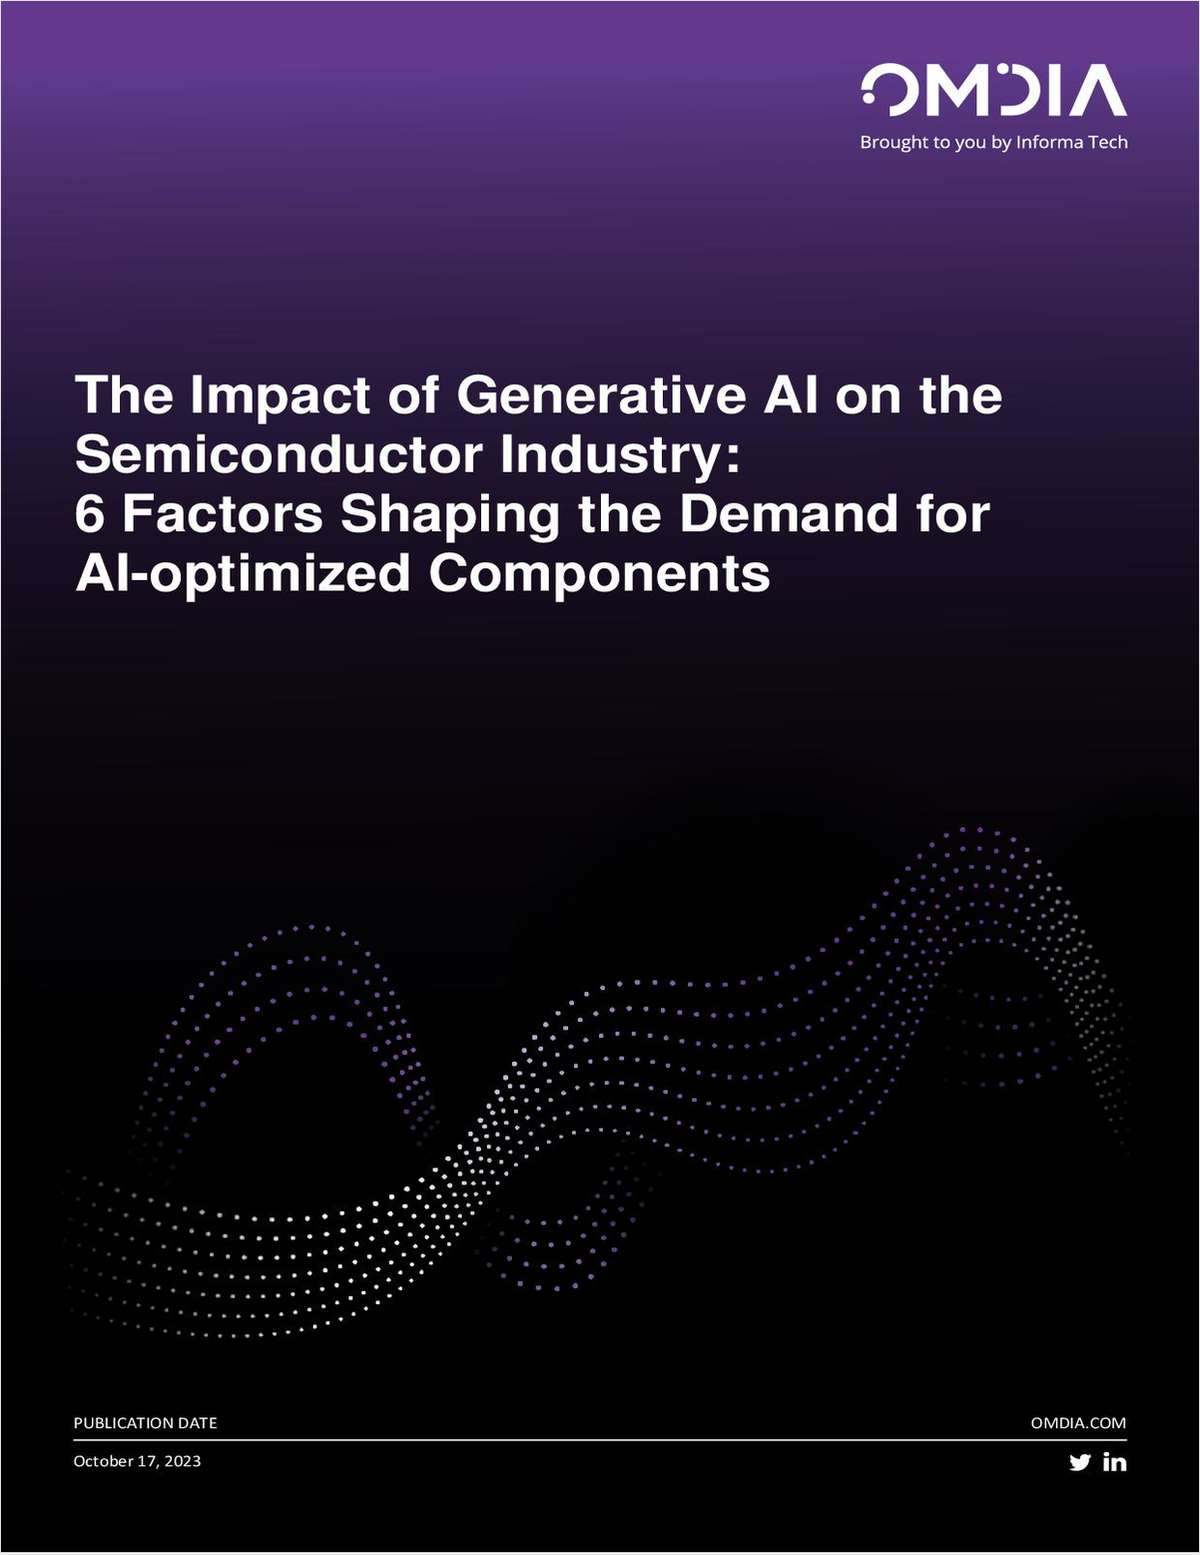 The Impact of Generative AI on the Semiconductor Industry: 6 Factors Shaping the Demand for AI-optimized Components